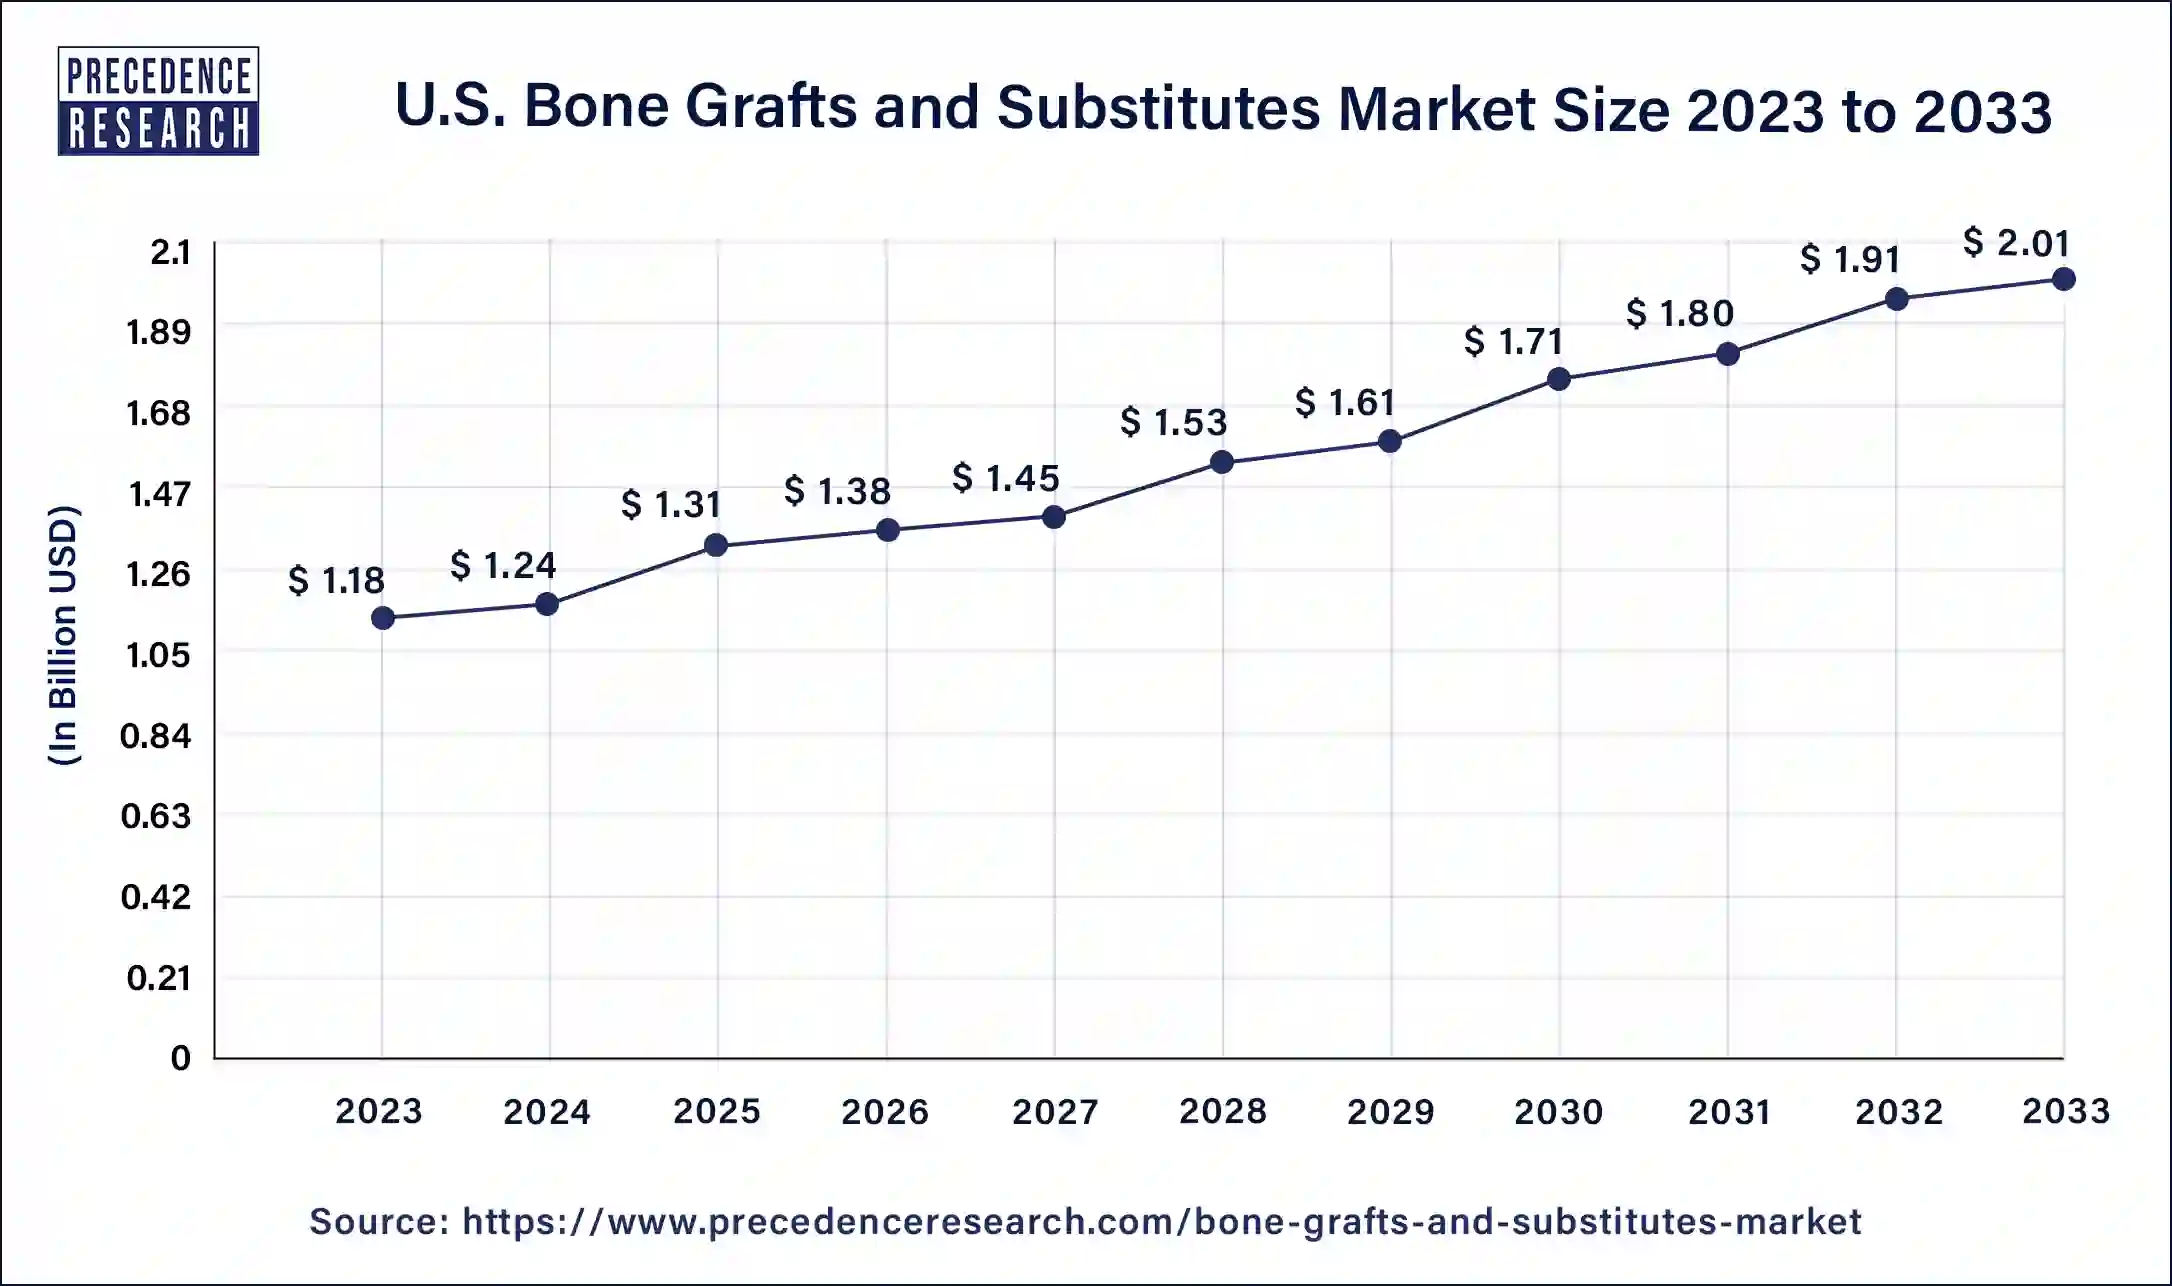 U.S. Bone Grafts and Substitutes Market Size 2024 to 2033